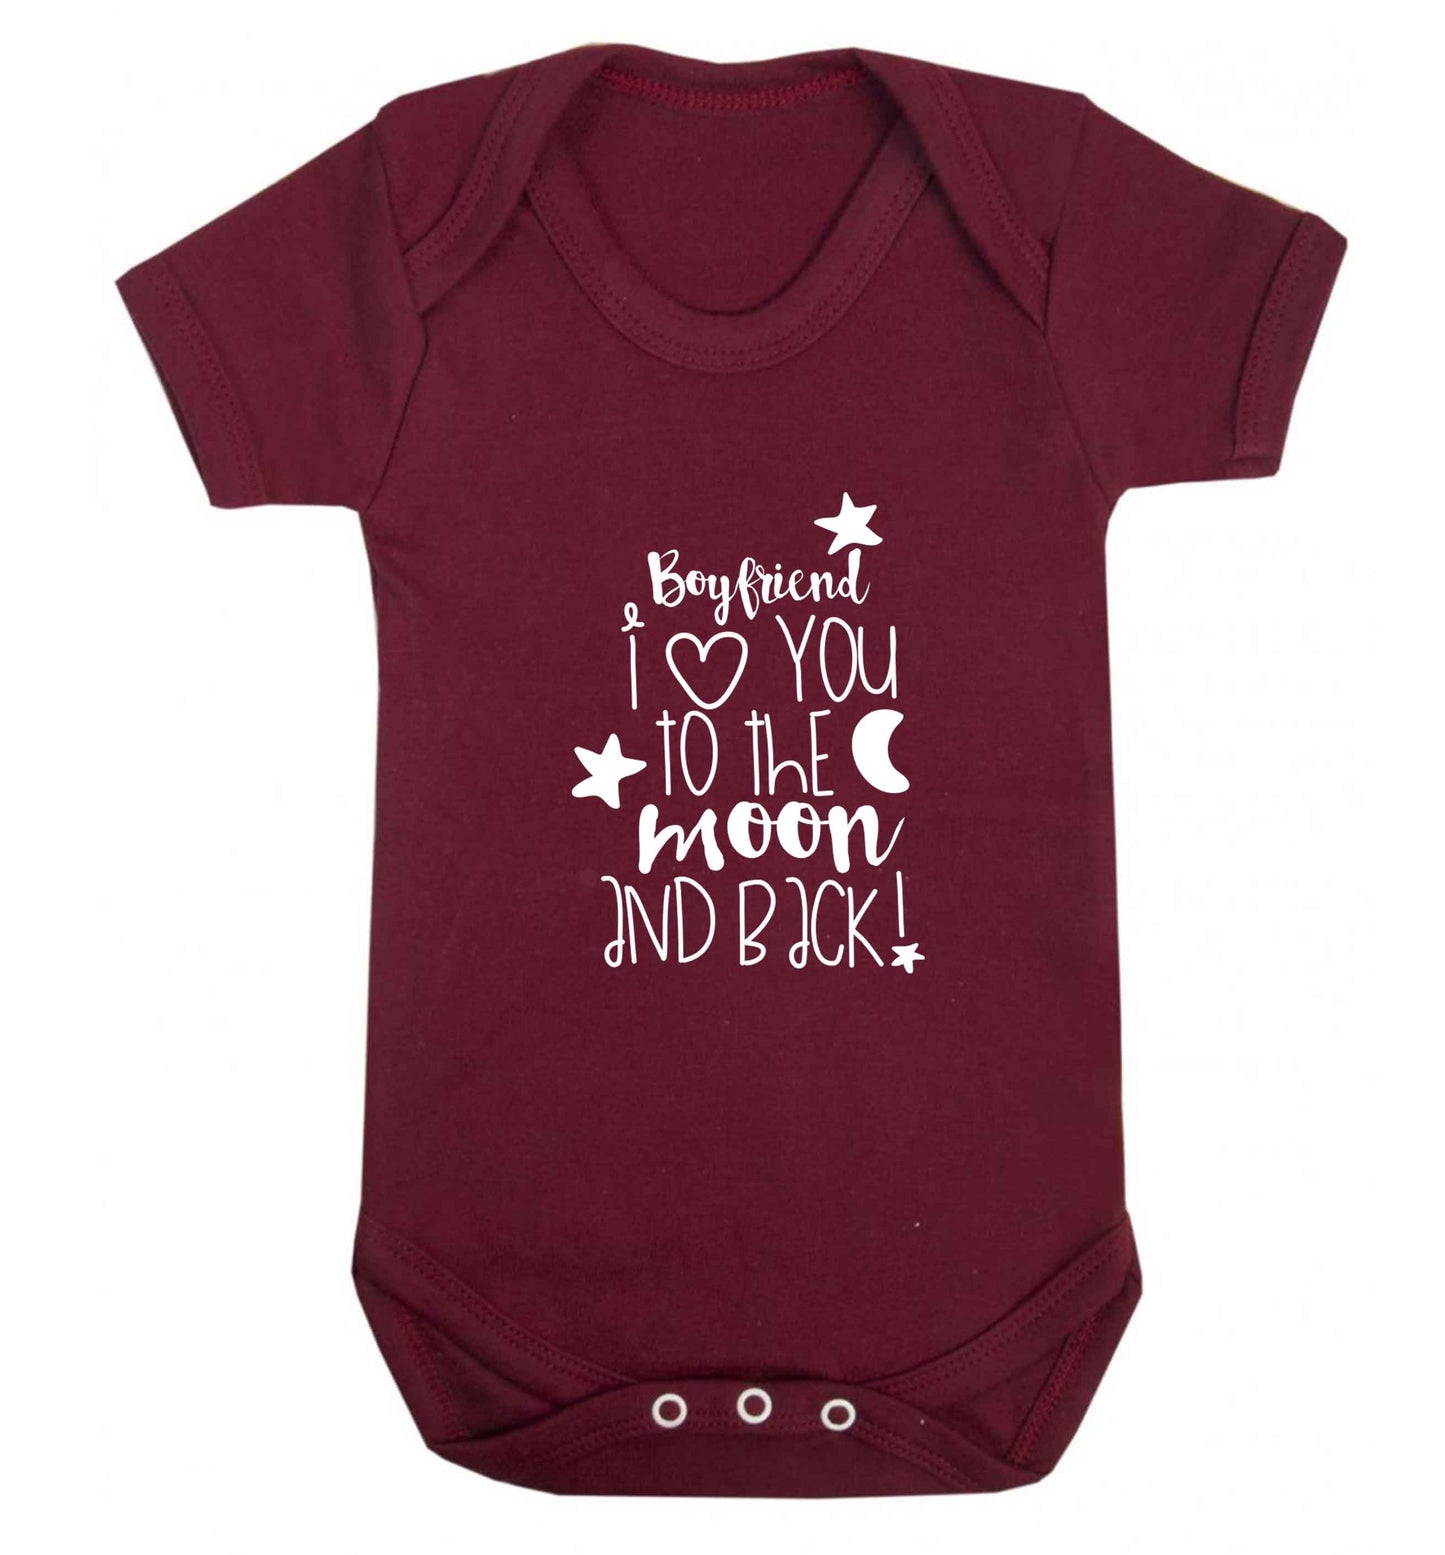 Boyfriend I love you to the moon and back baby vest maroon 18-24 months